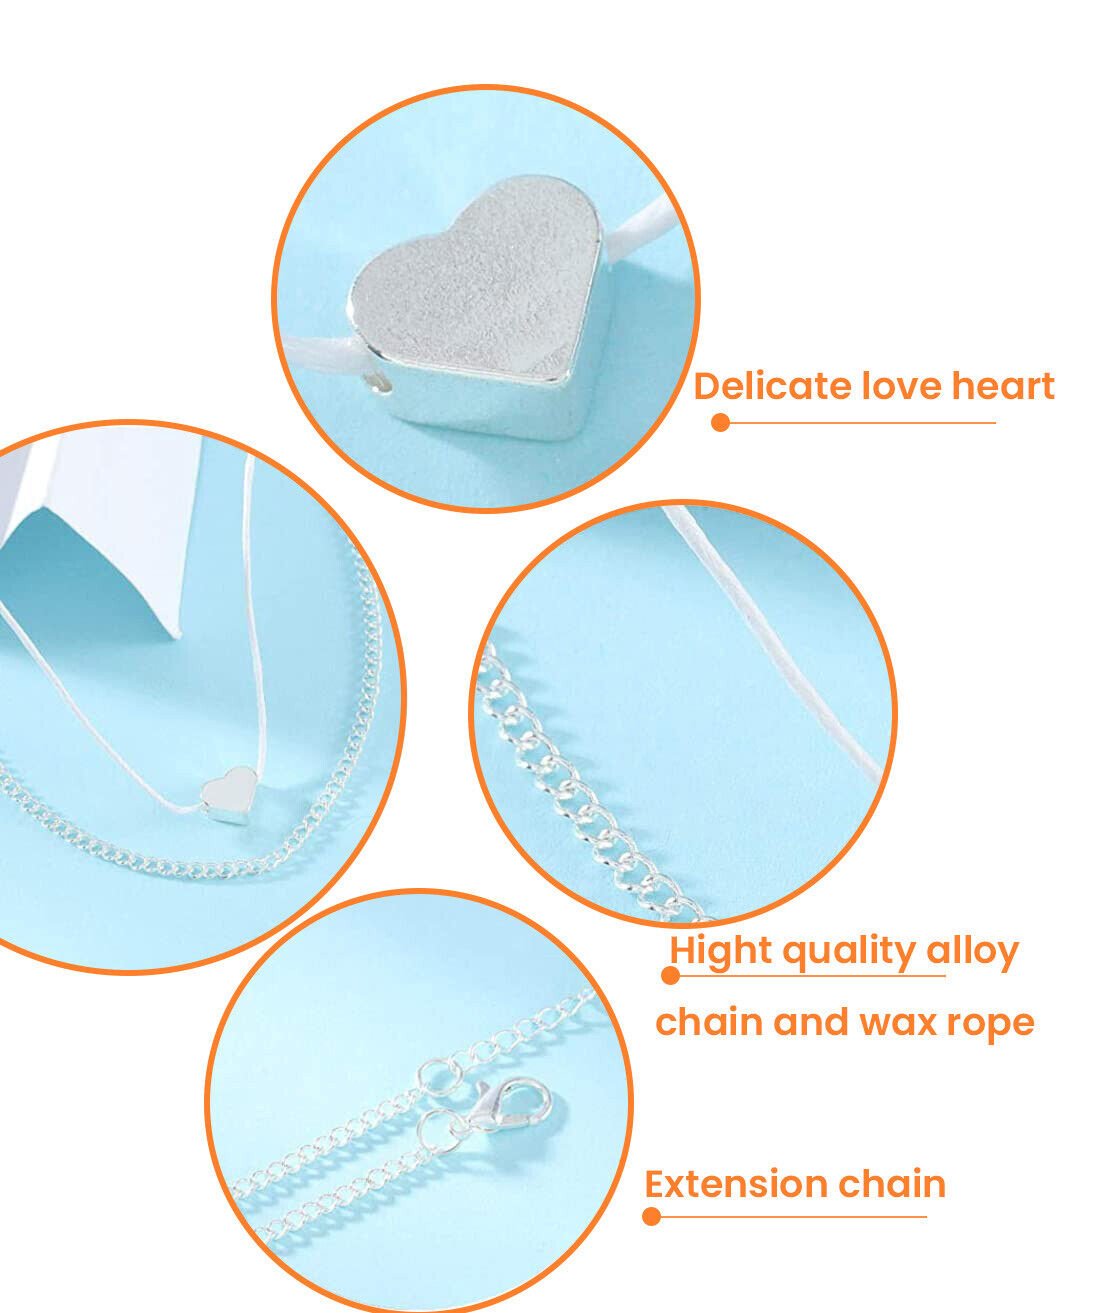 Fashion Love Heart Anklet